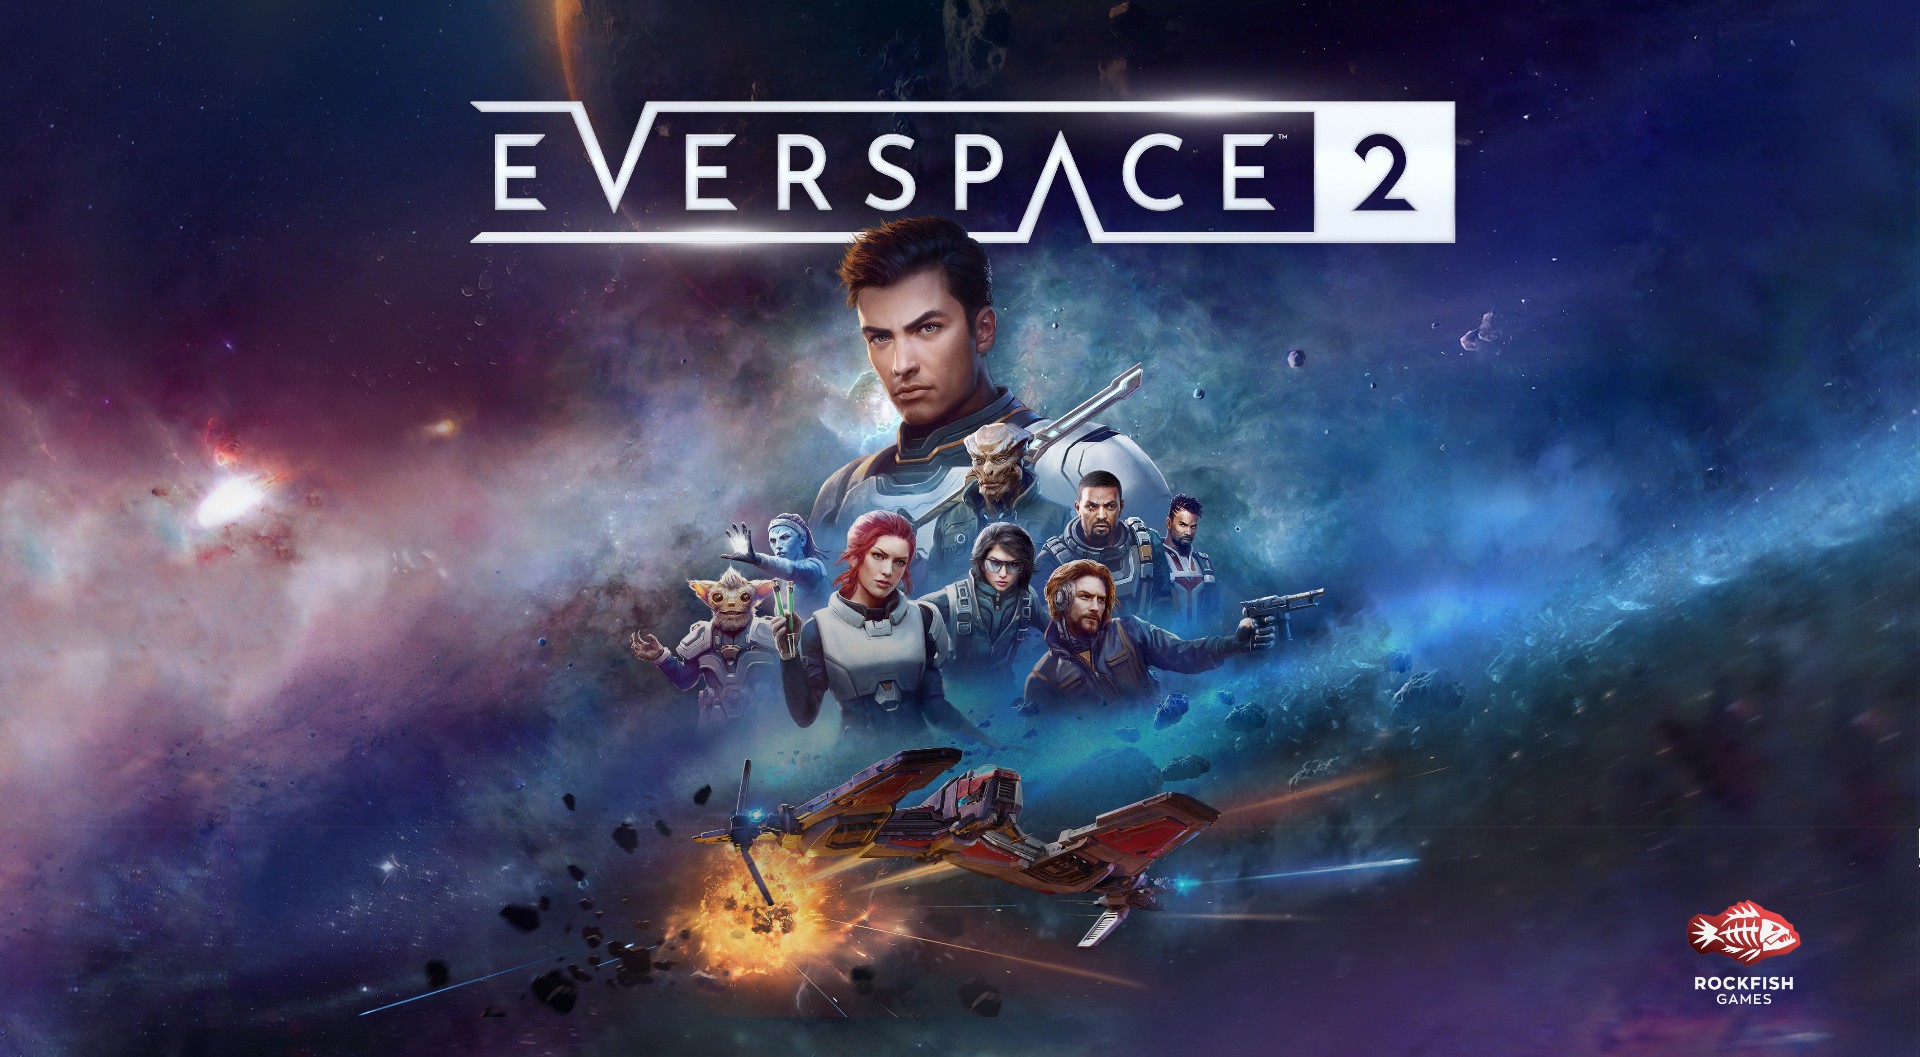 EVERSPACE2